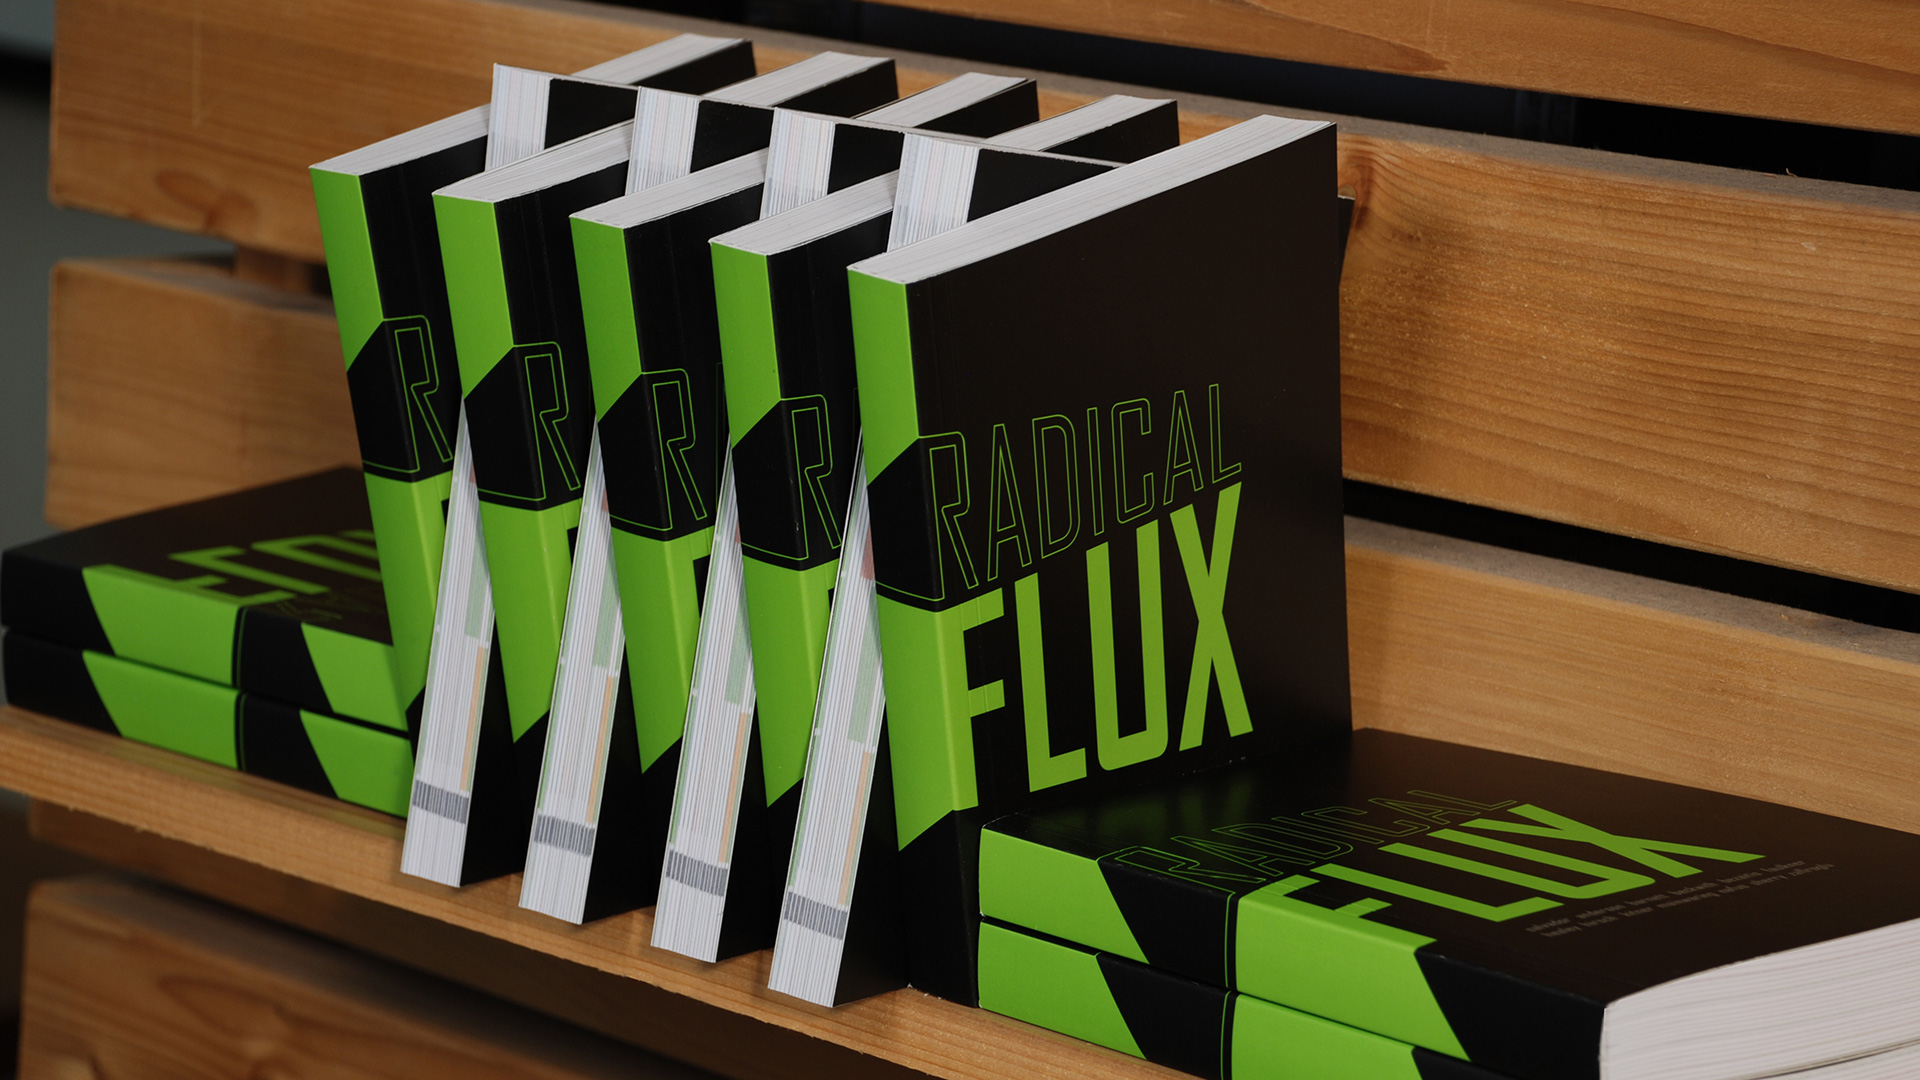 Radical Flux book design created by Incubate Design for Intel